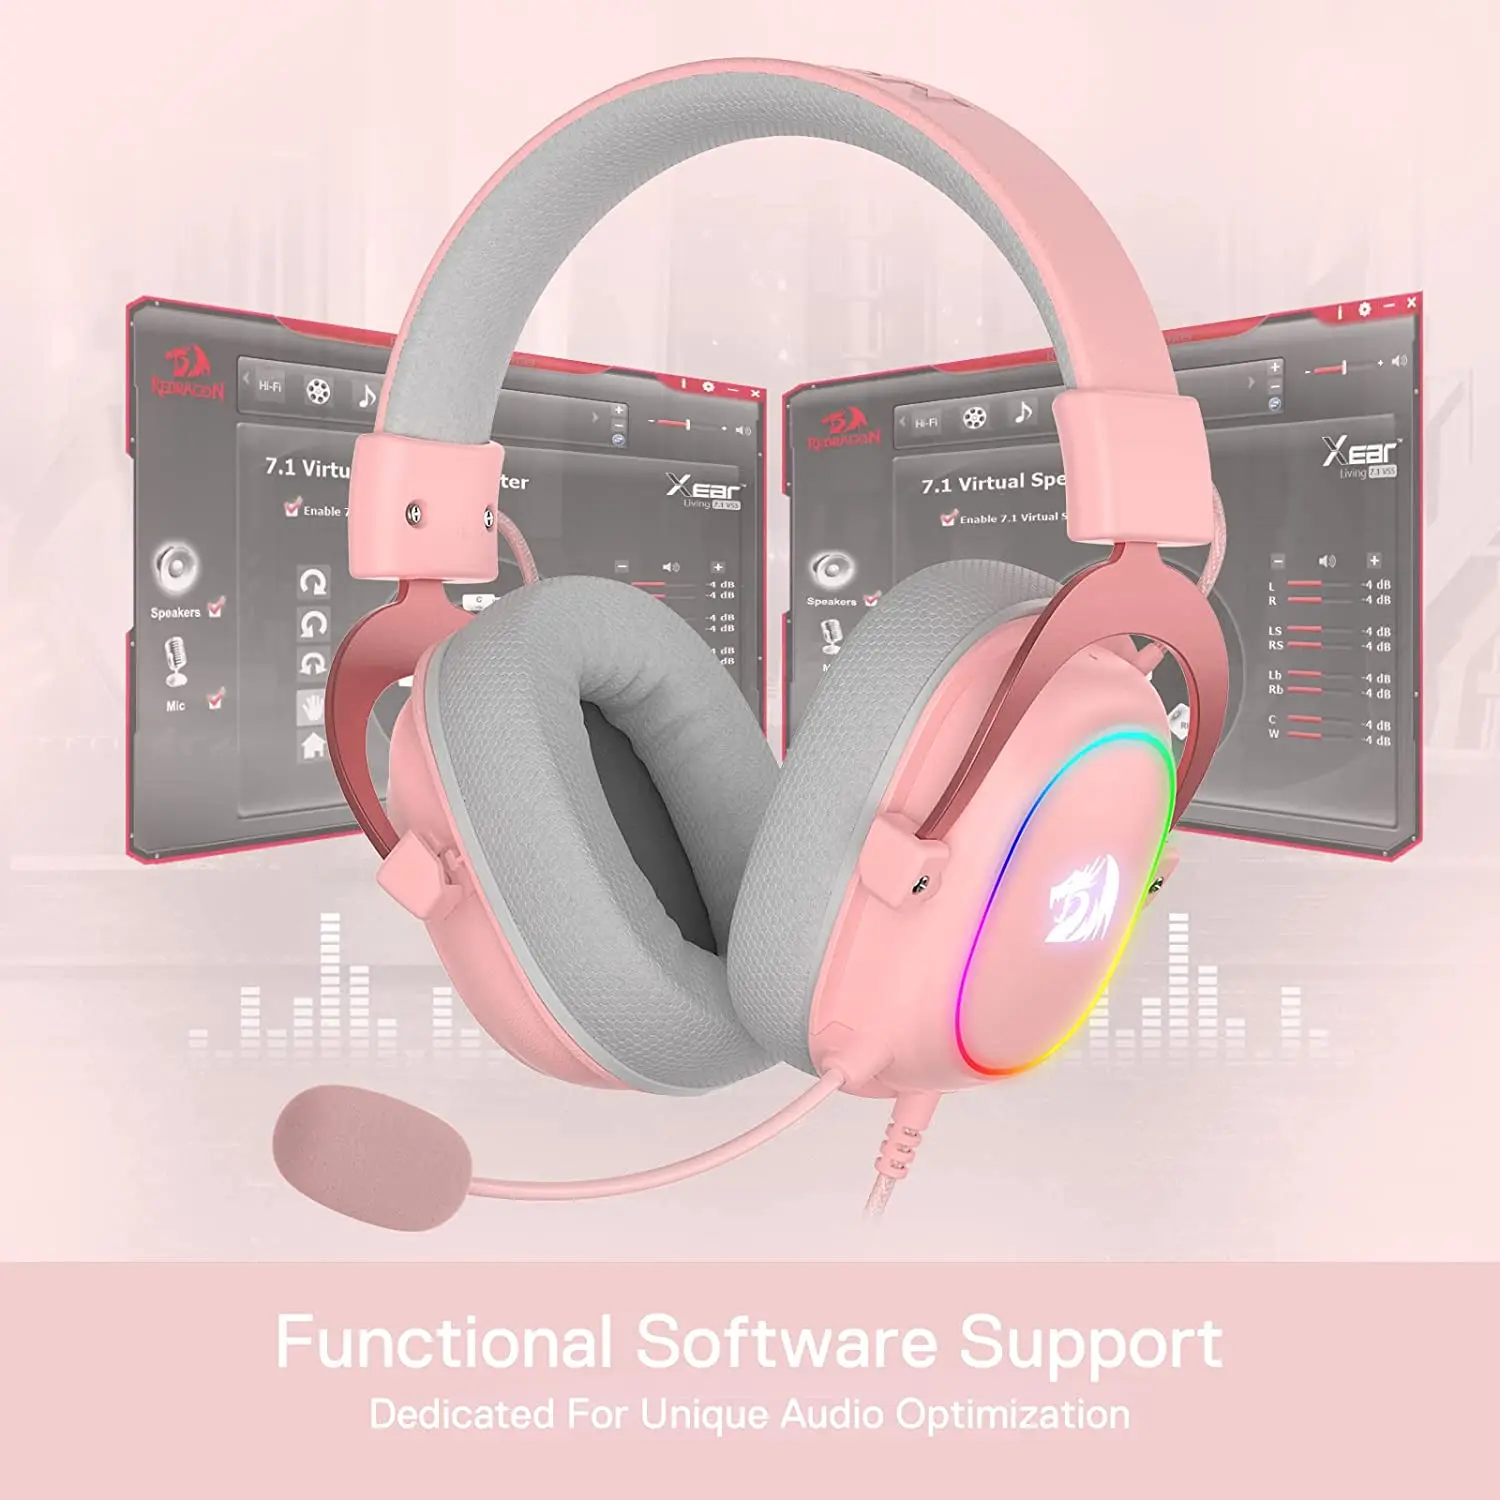 Redragon Pink Earpiece RGB Wired Gaming Headset - 7.1 Surround Sound Multi Platforms  Headphone  USB Powered  for PC/PS4/NS images - 6